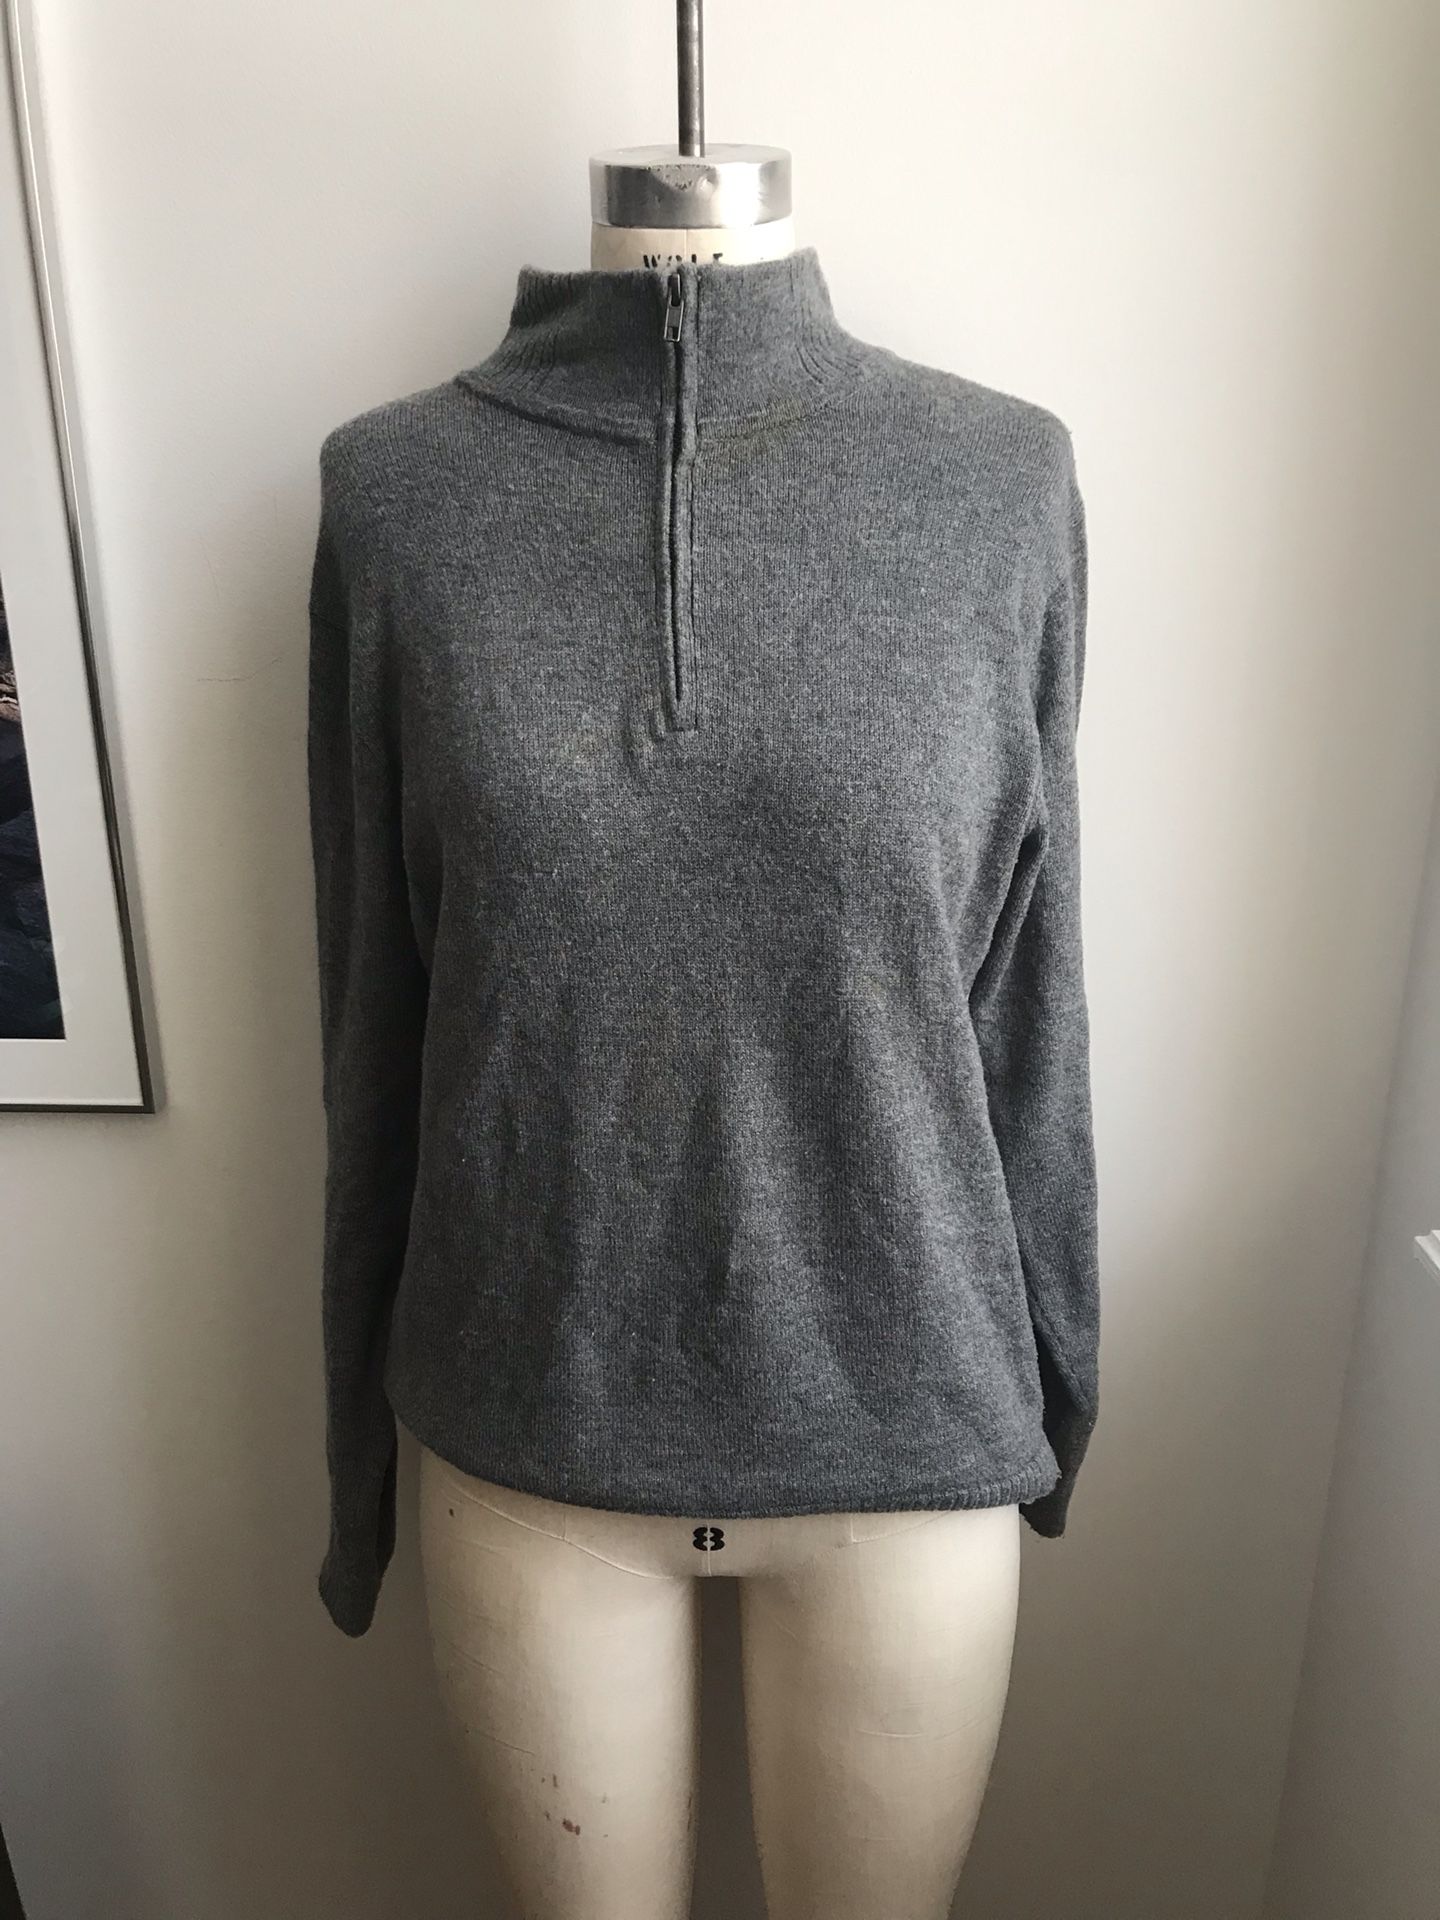 Men’s gray Patagonia pull over zip sweater size small.